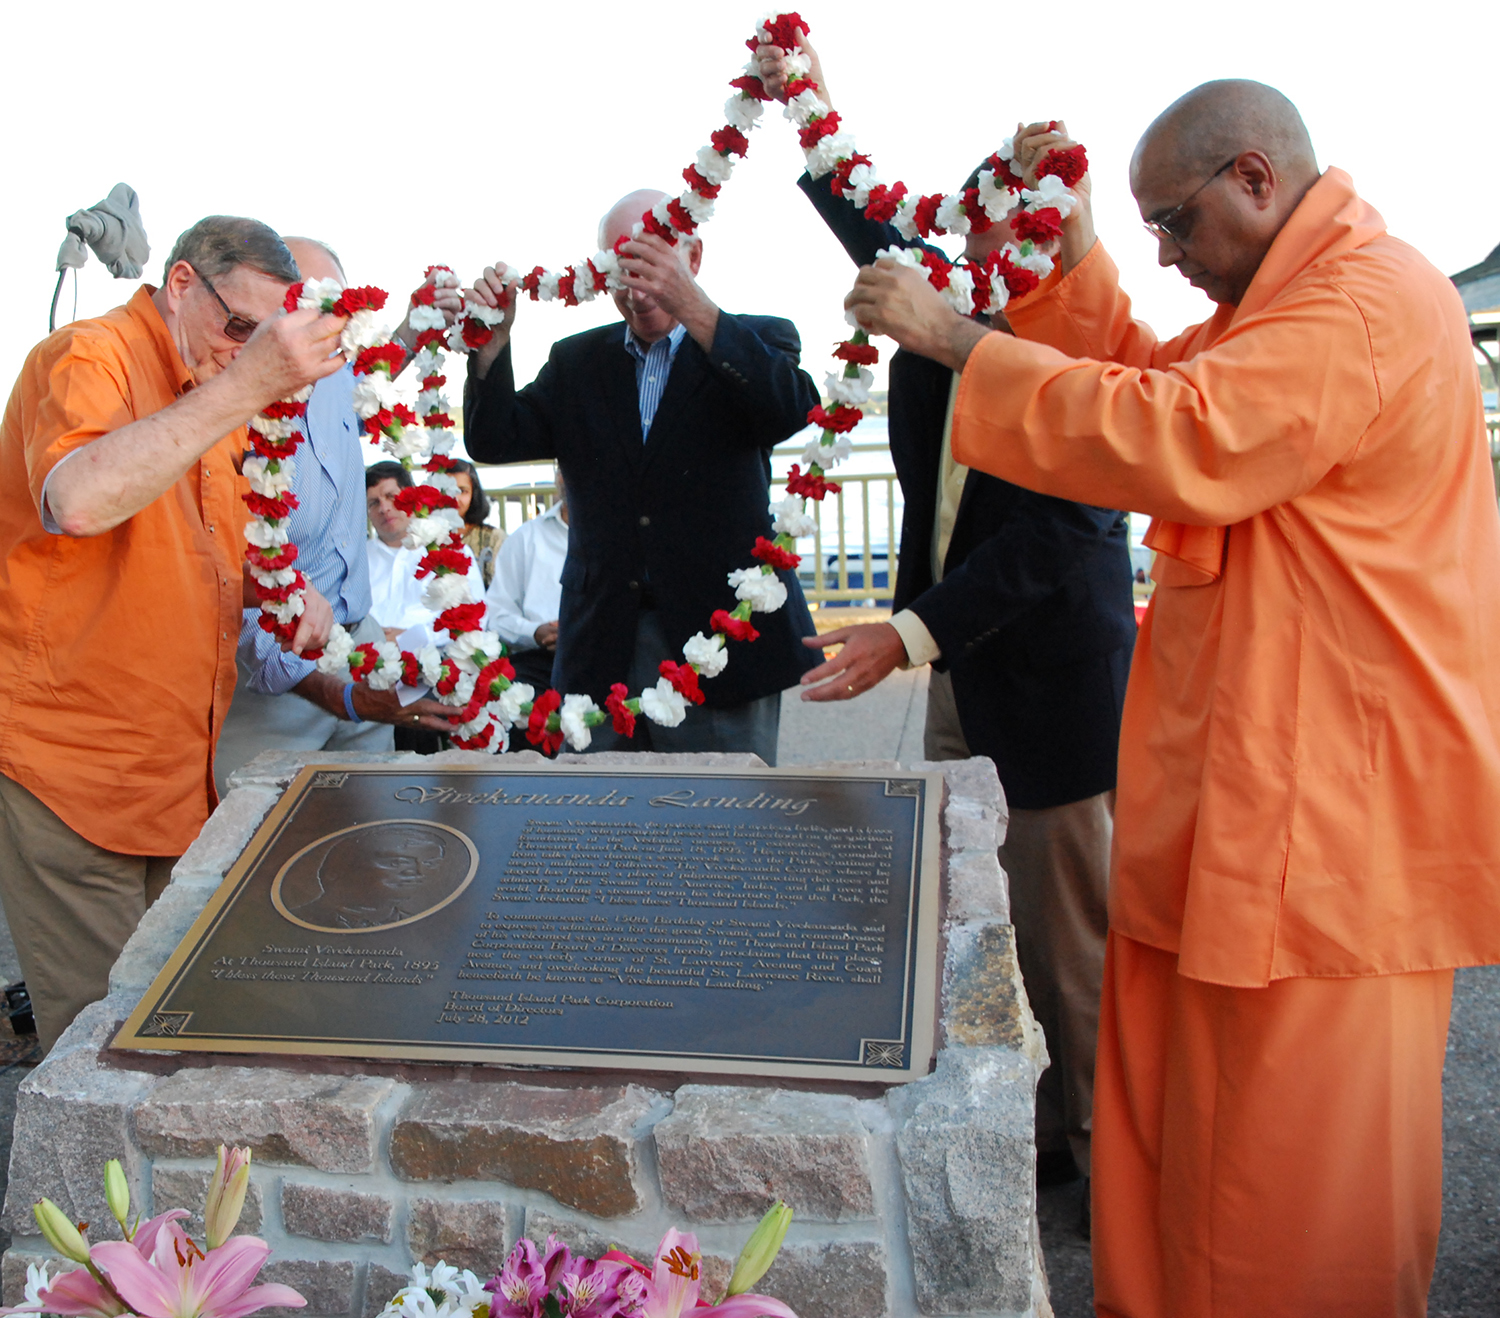 Swami Yuktatmananda and others laying flowers on memorial.